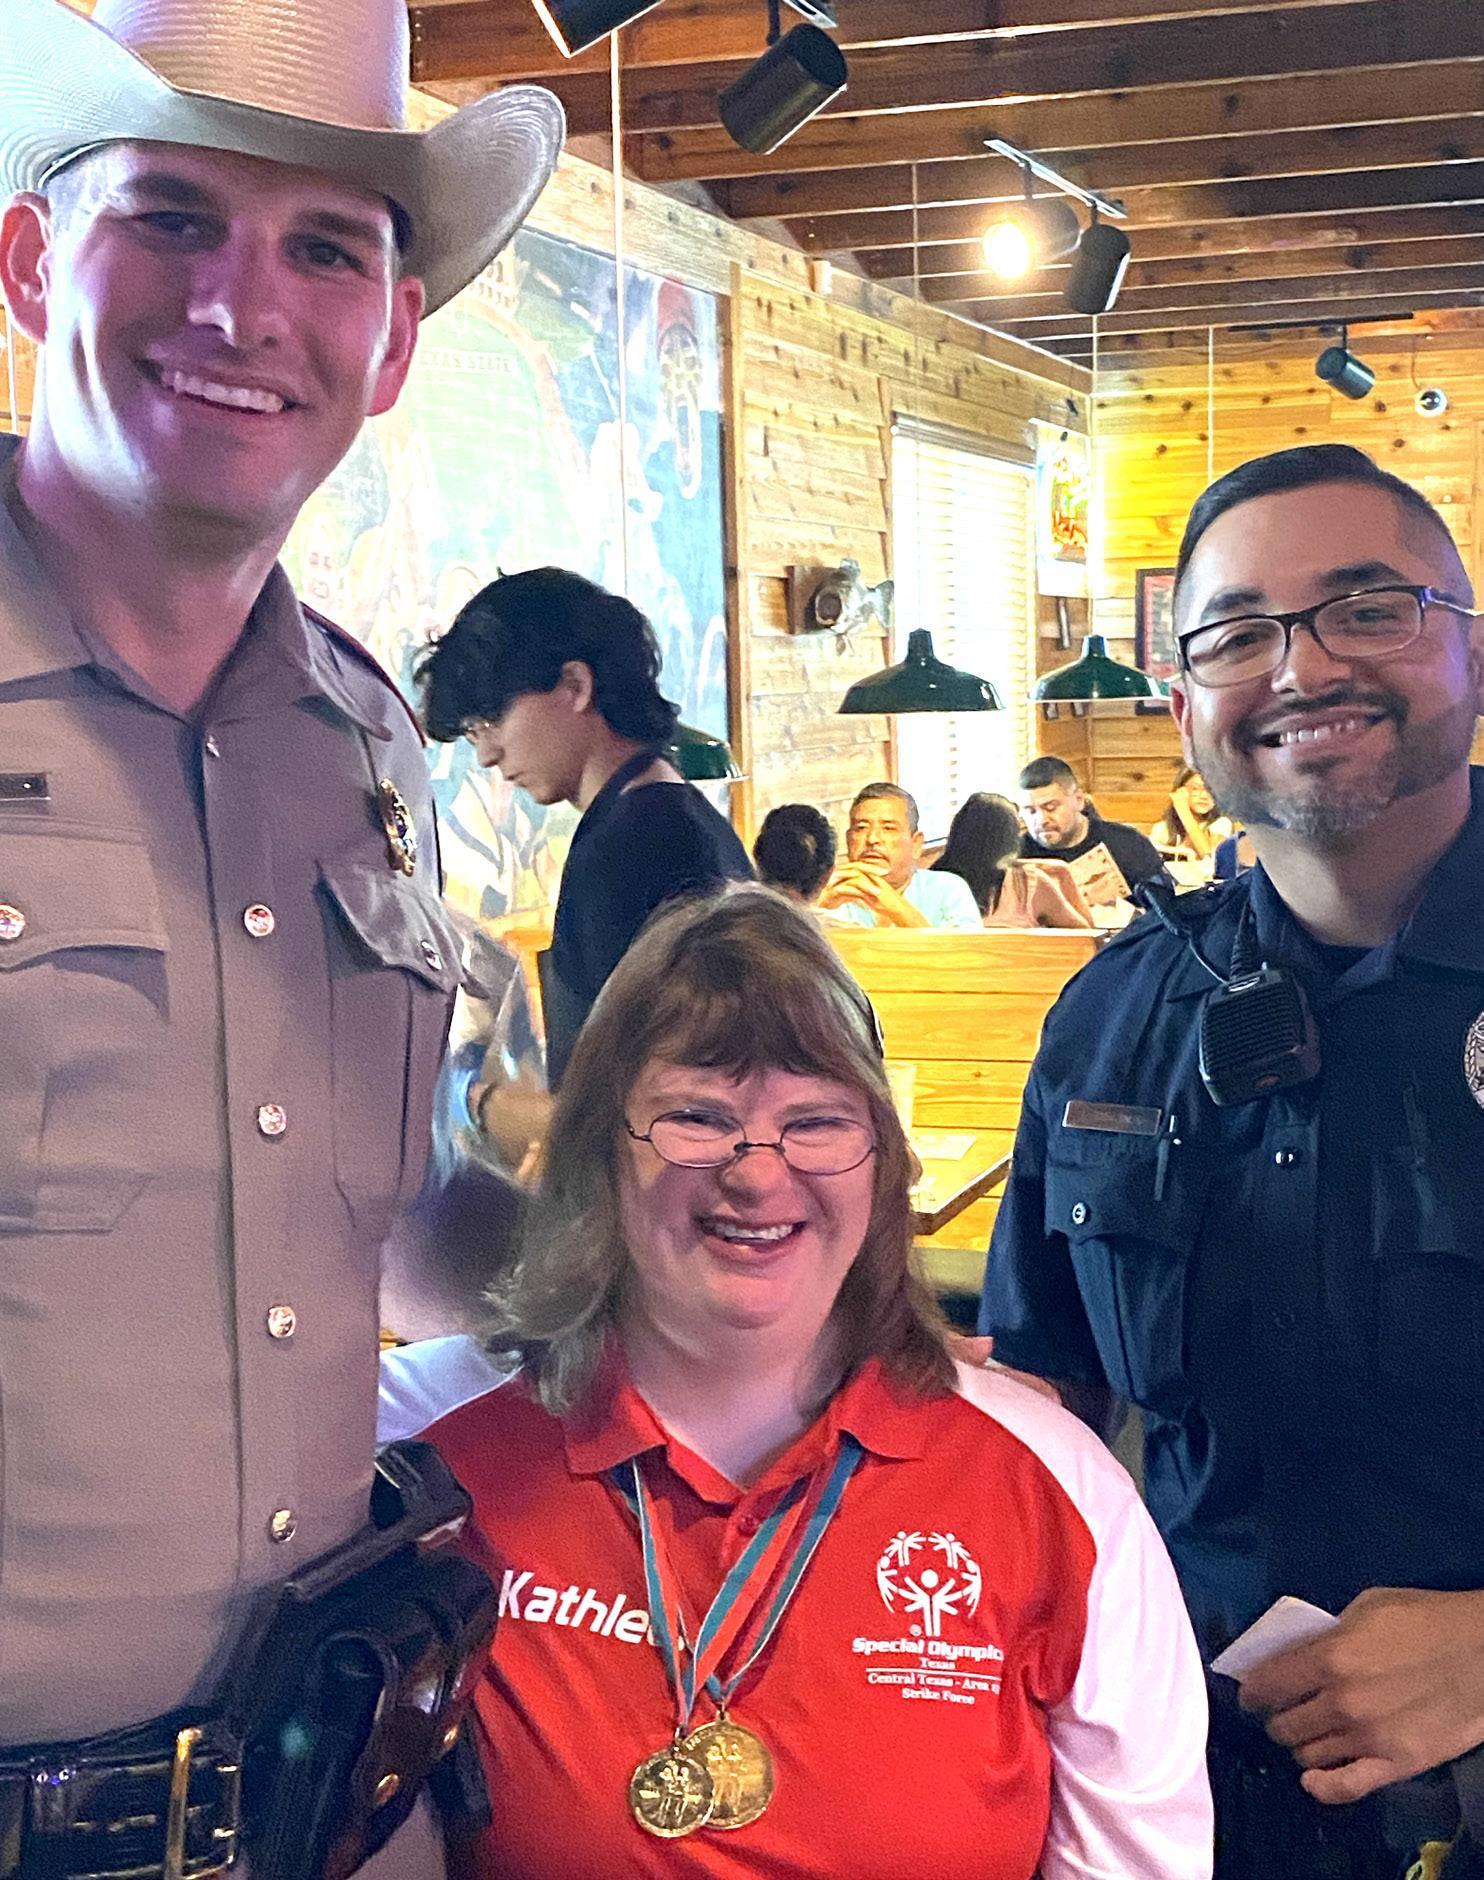 Tip-A-Cop raises funds for area Special Olympics